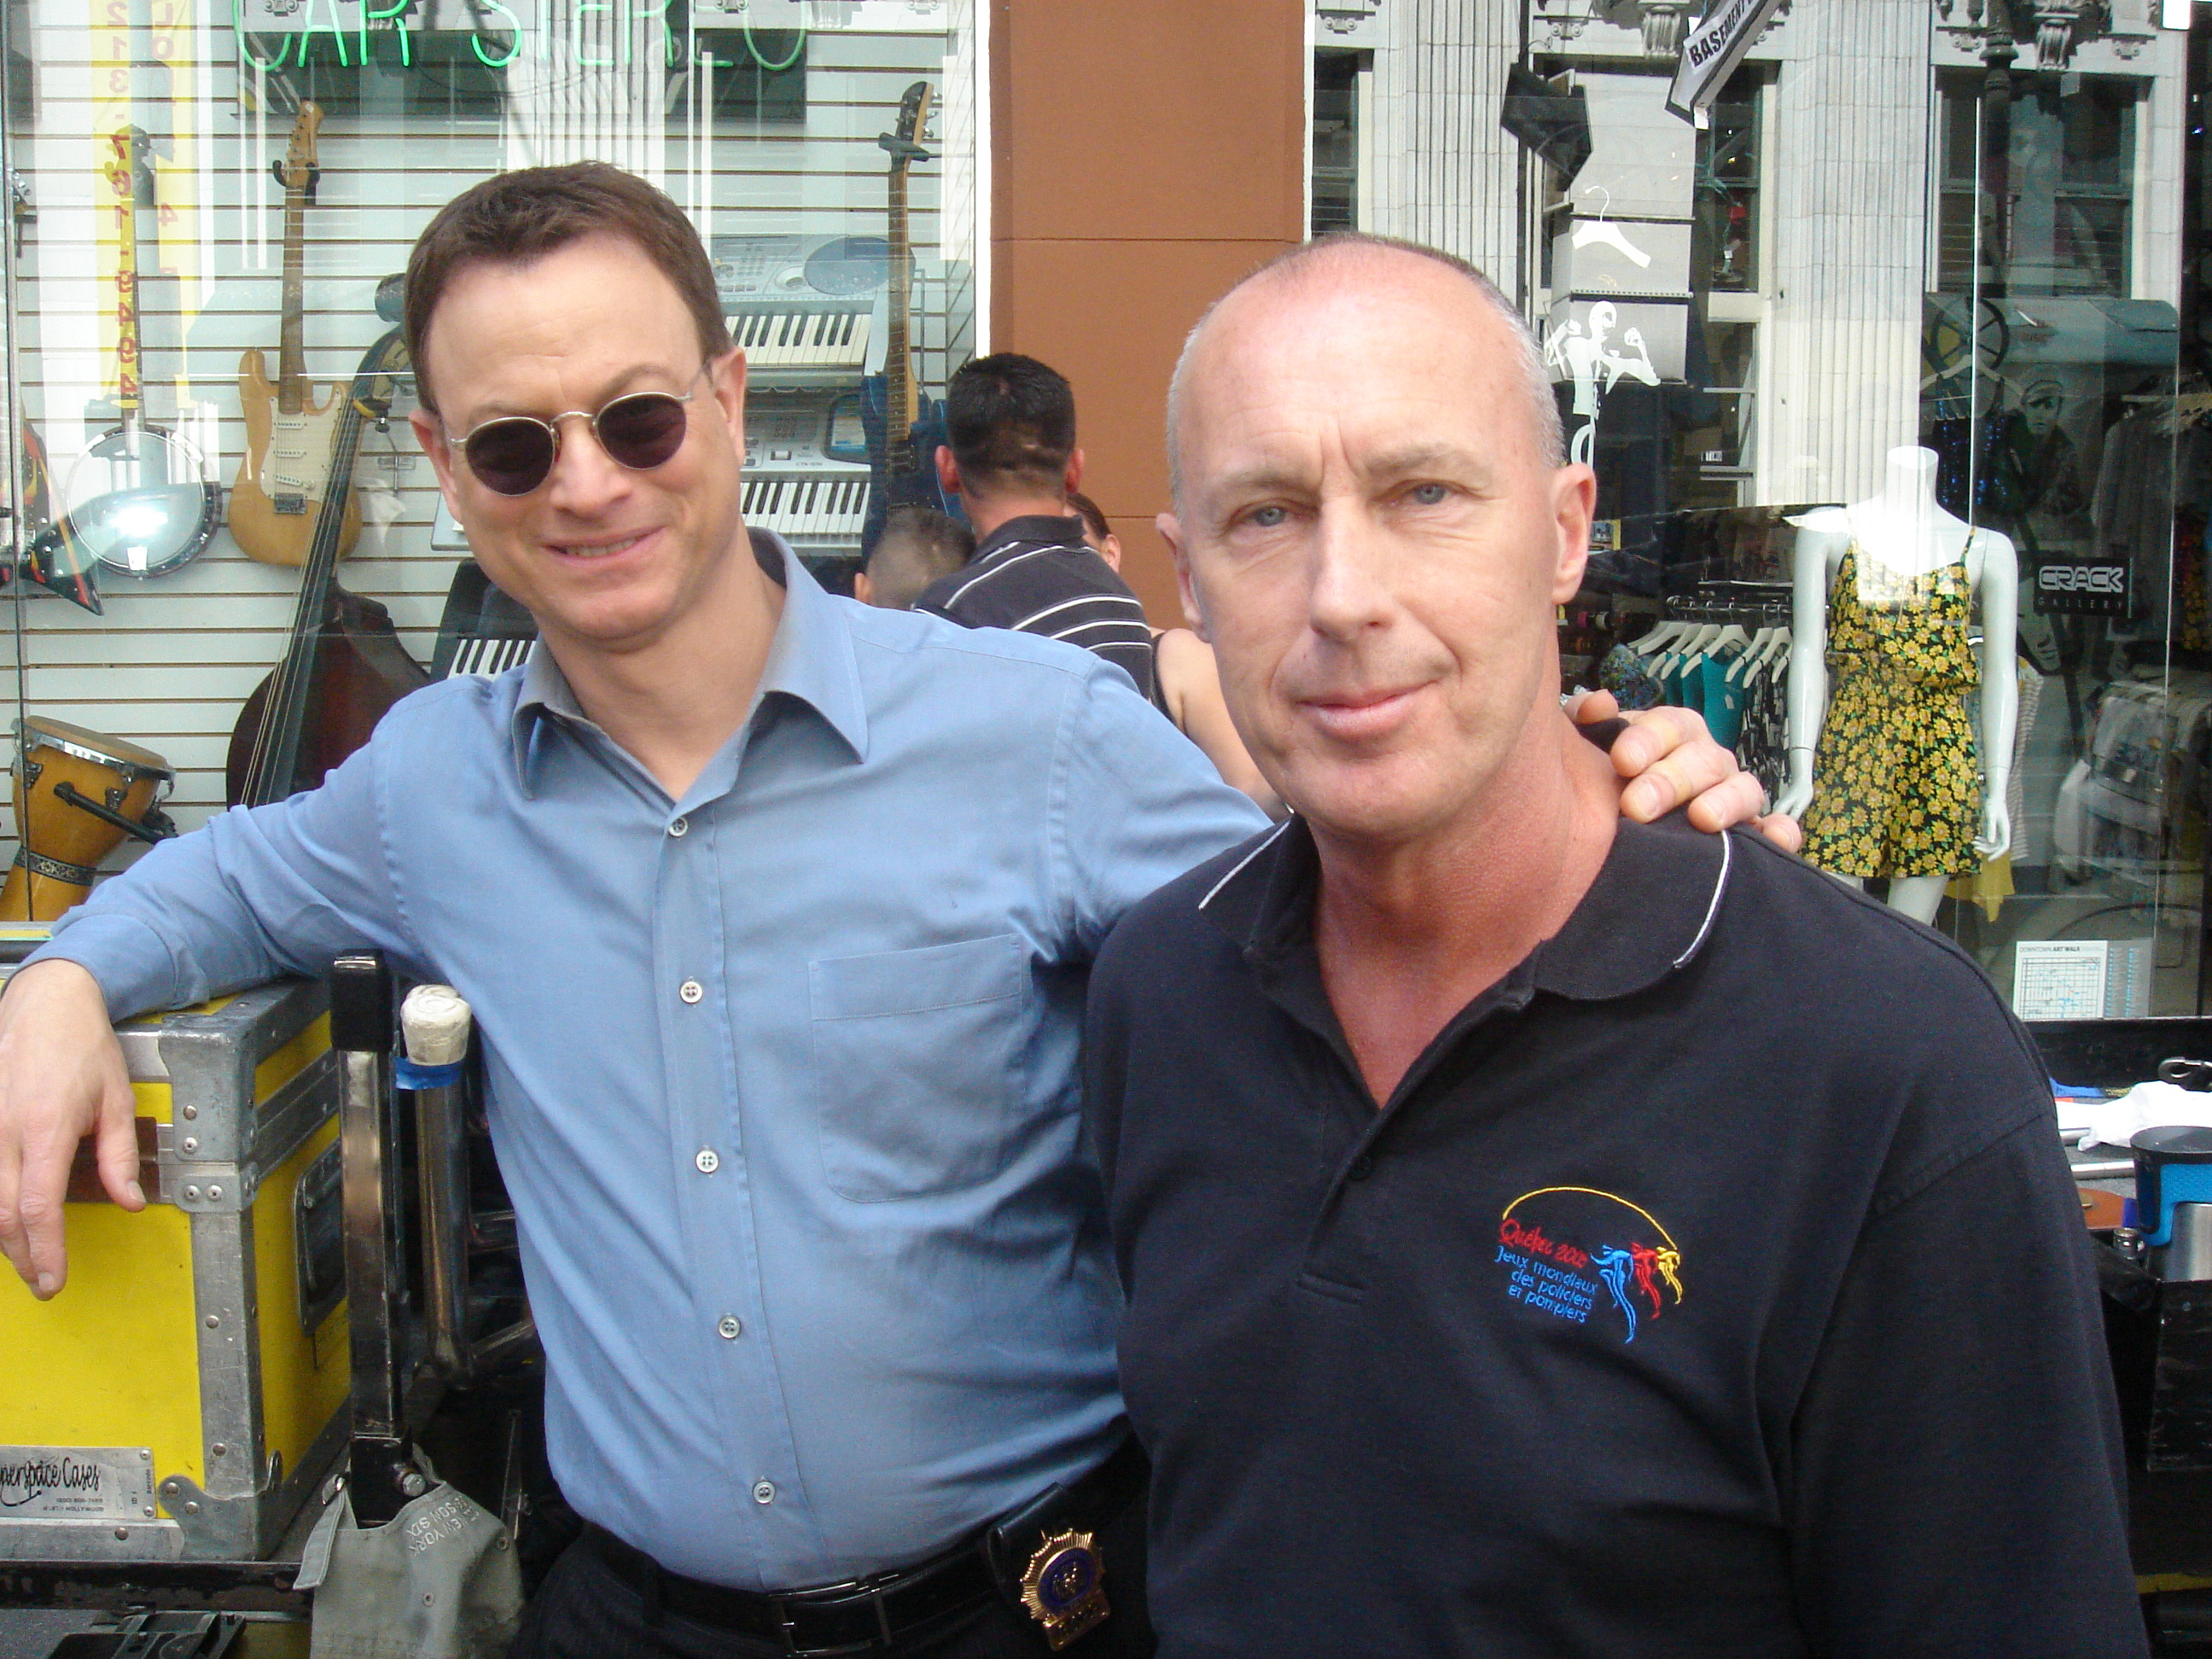 Gary Sinise and Colin Campbell: A real scene-of-crime officer meets a real famous one